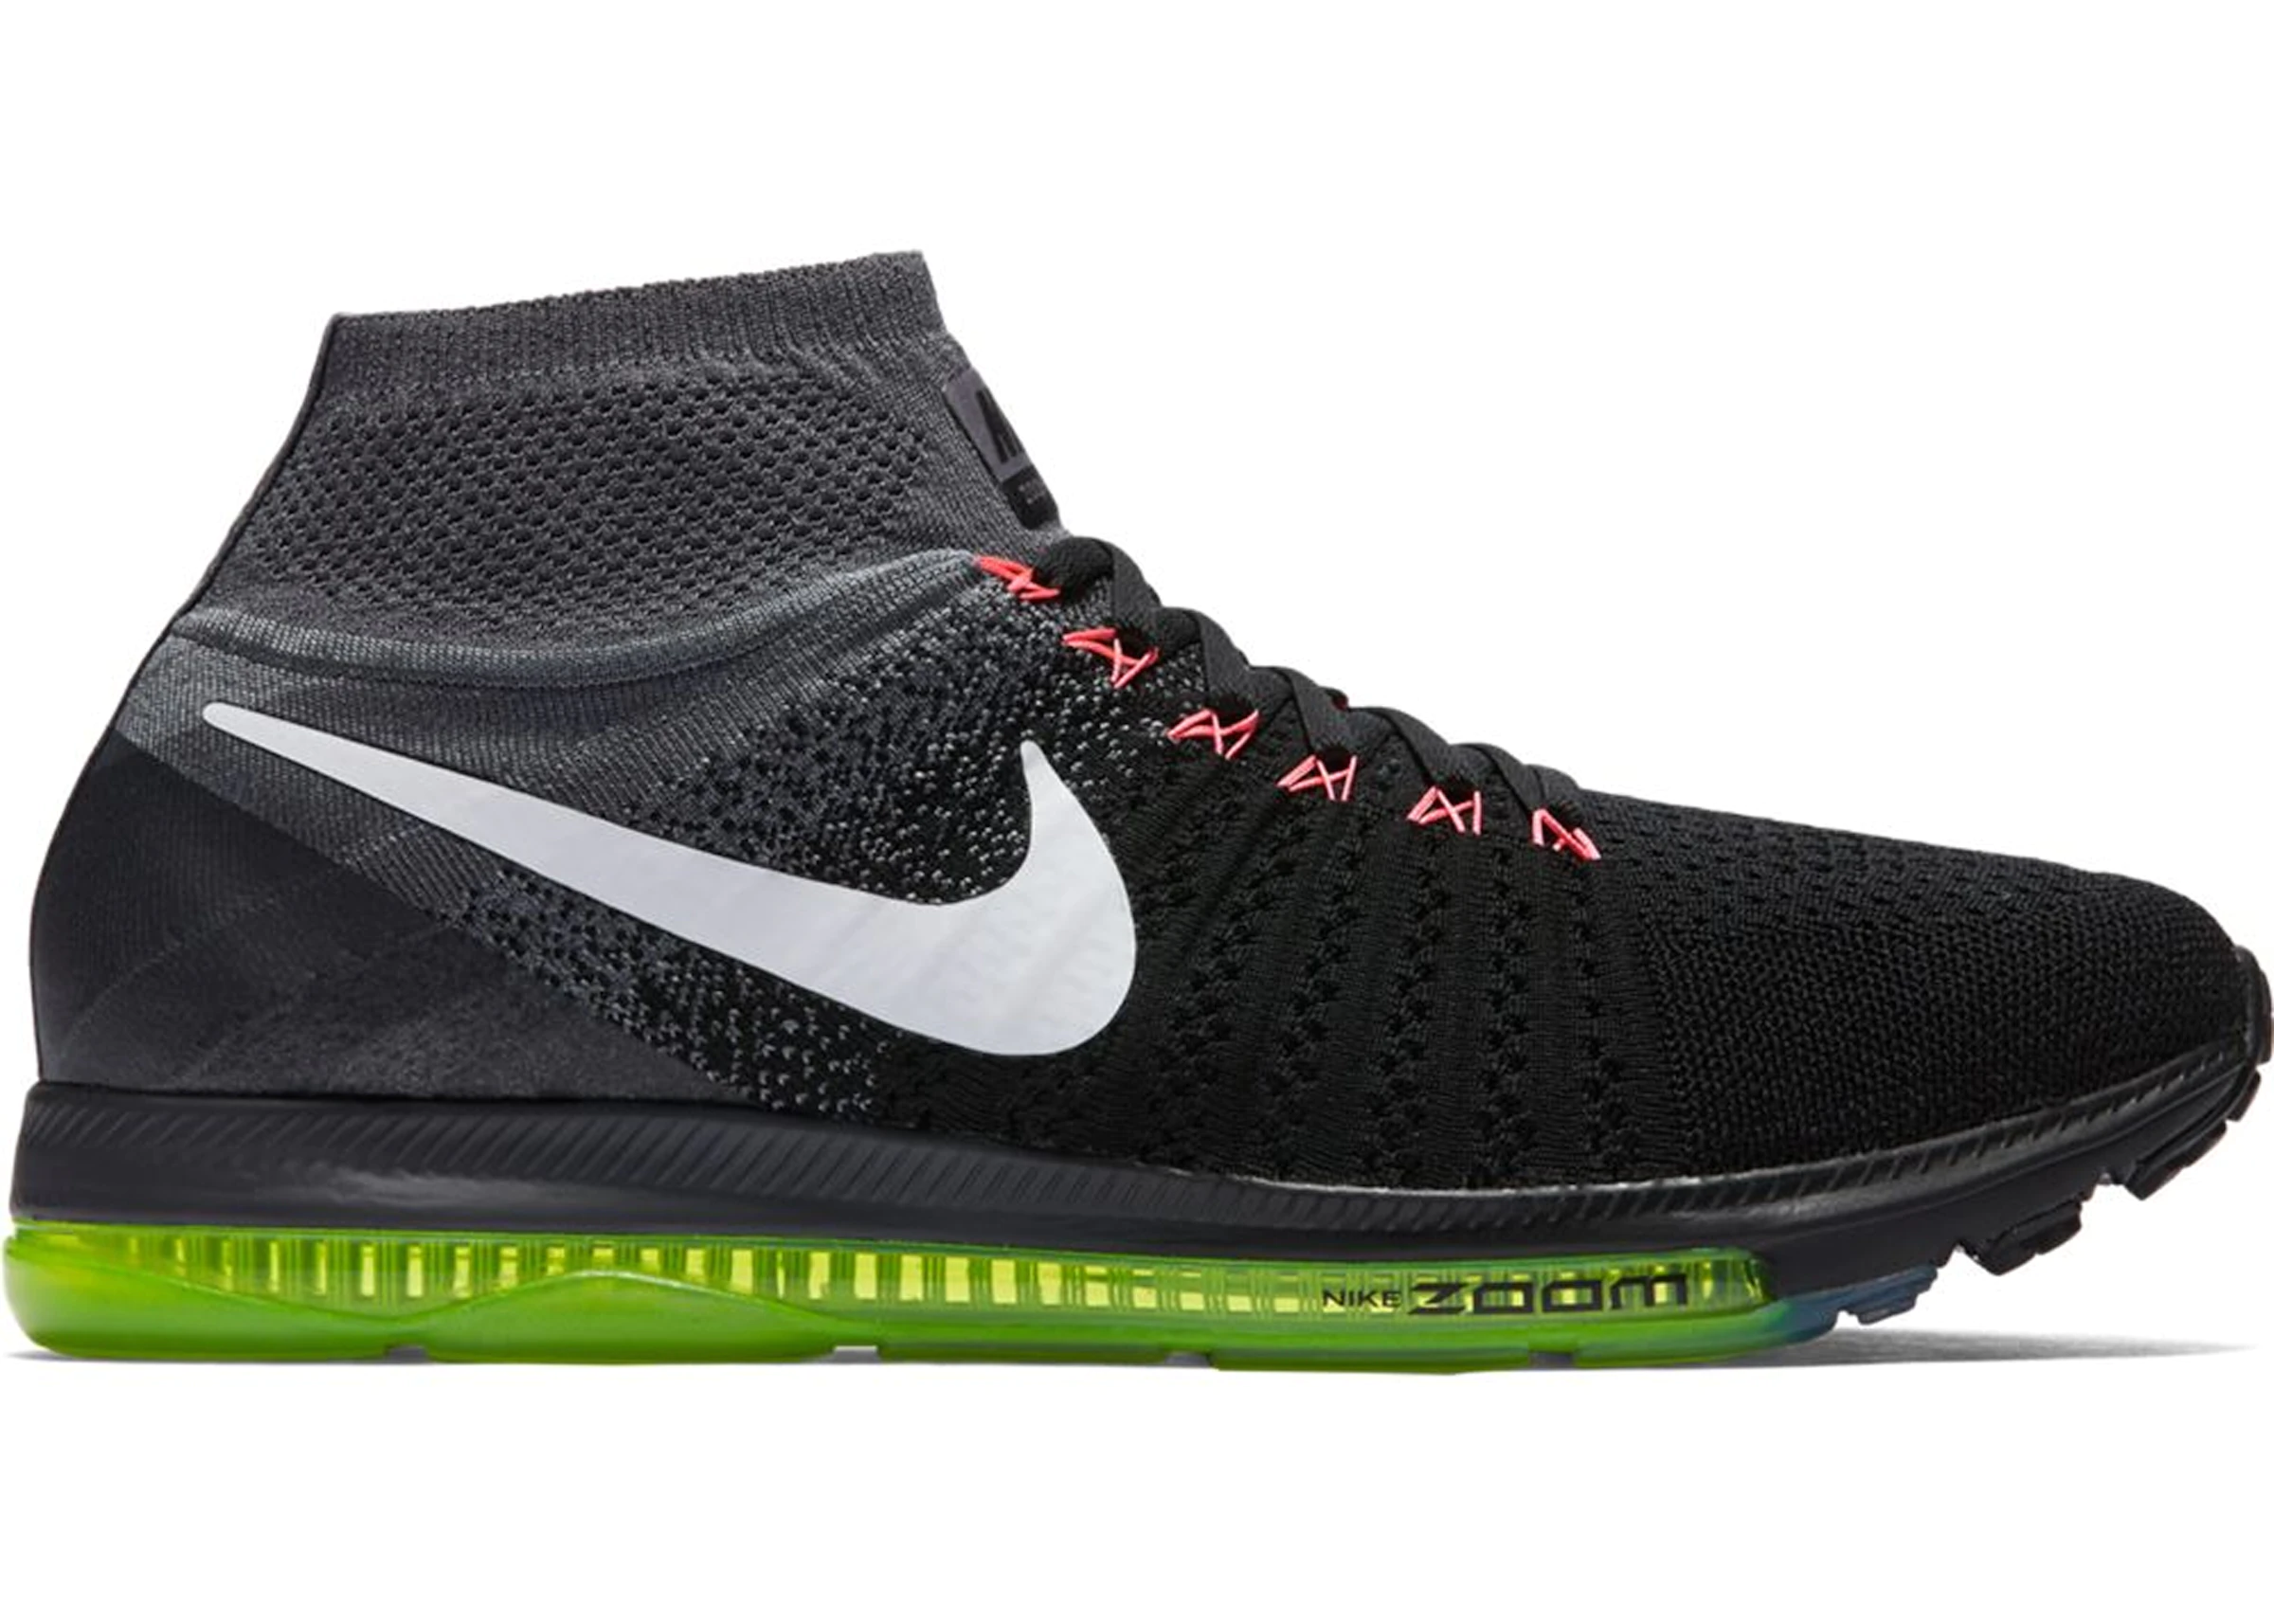 toon Lionel Green Street Verbonden Nike Zoom All Out Flyknit Black White Volt (Women's) - 845361-002 - US